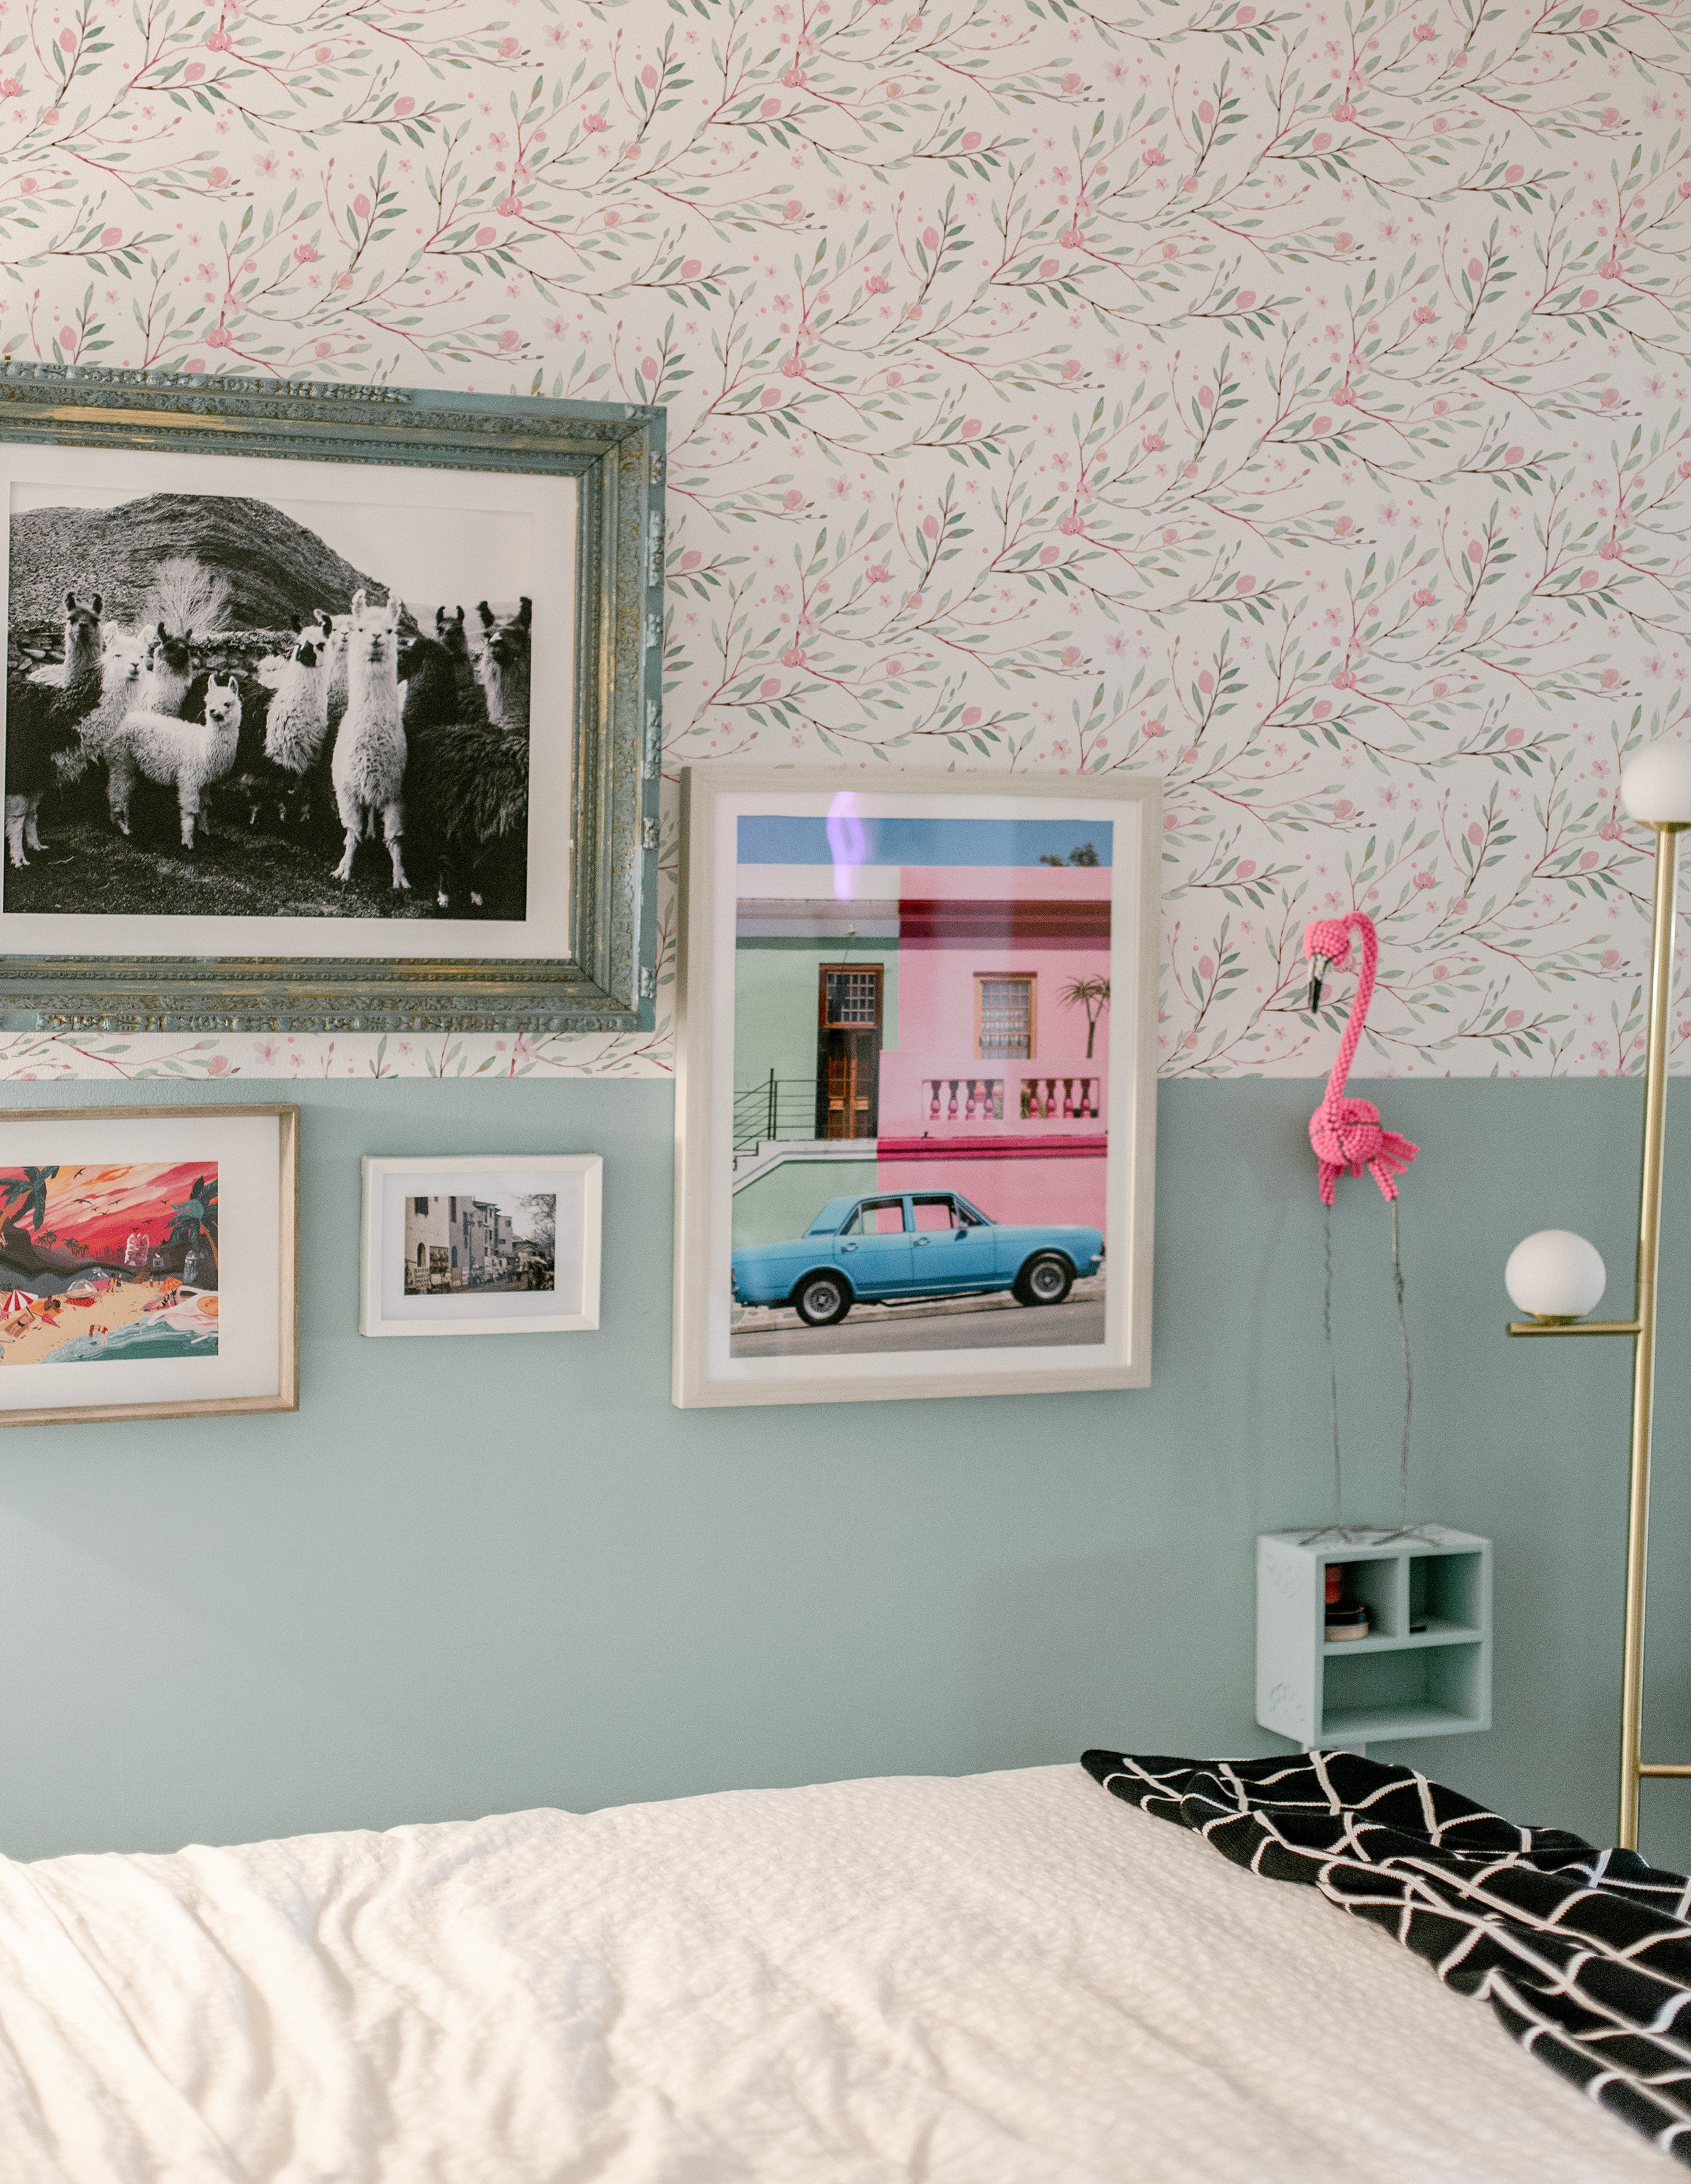 A stylish bedroom decorated with Watercolour Spring Bird Wallpaper - Multi, enhancing the room's charm with its soft floral pattern amid eclectic framed pictures, creating a cozy and inviting atmosphere.